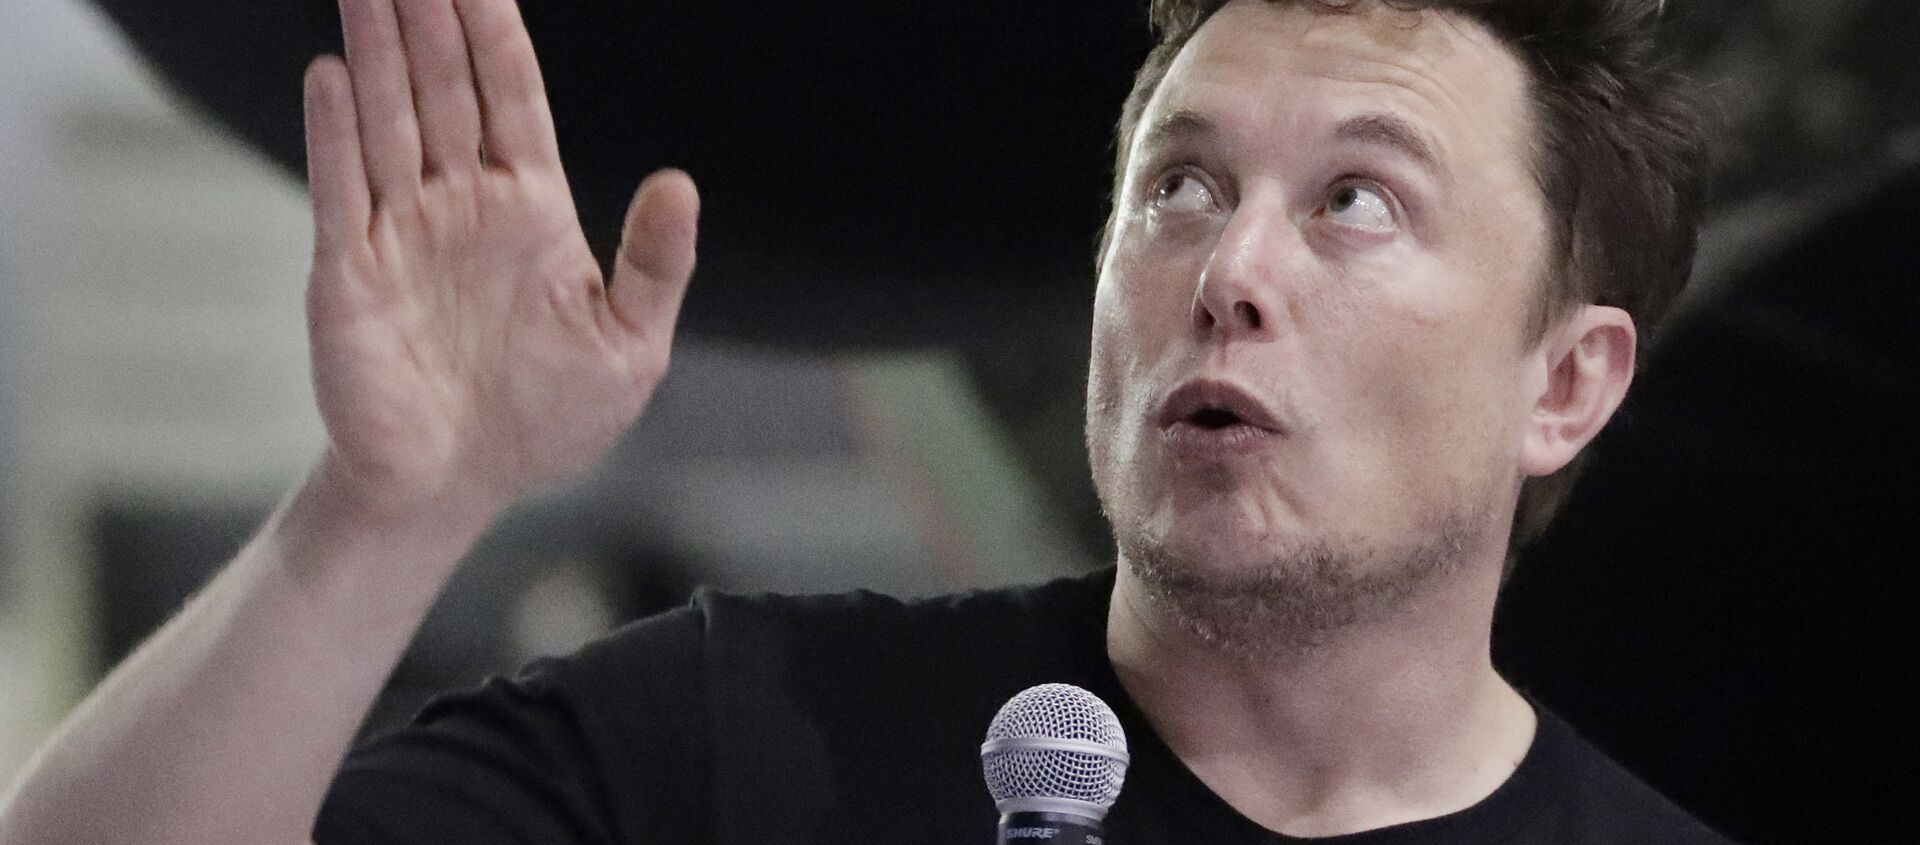 SpaceX founder and chief executive Elon Musk speaks after announcing Japanese billionaire Yusaku Maezawa as the first private passenger on a trip around the moon, Monday, Sept. 17, 2018, in Hawthorne, Calif - Sputnik International, 1920, 26.02.2019